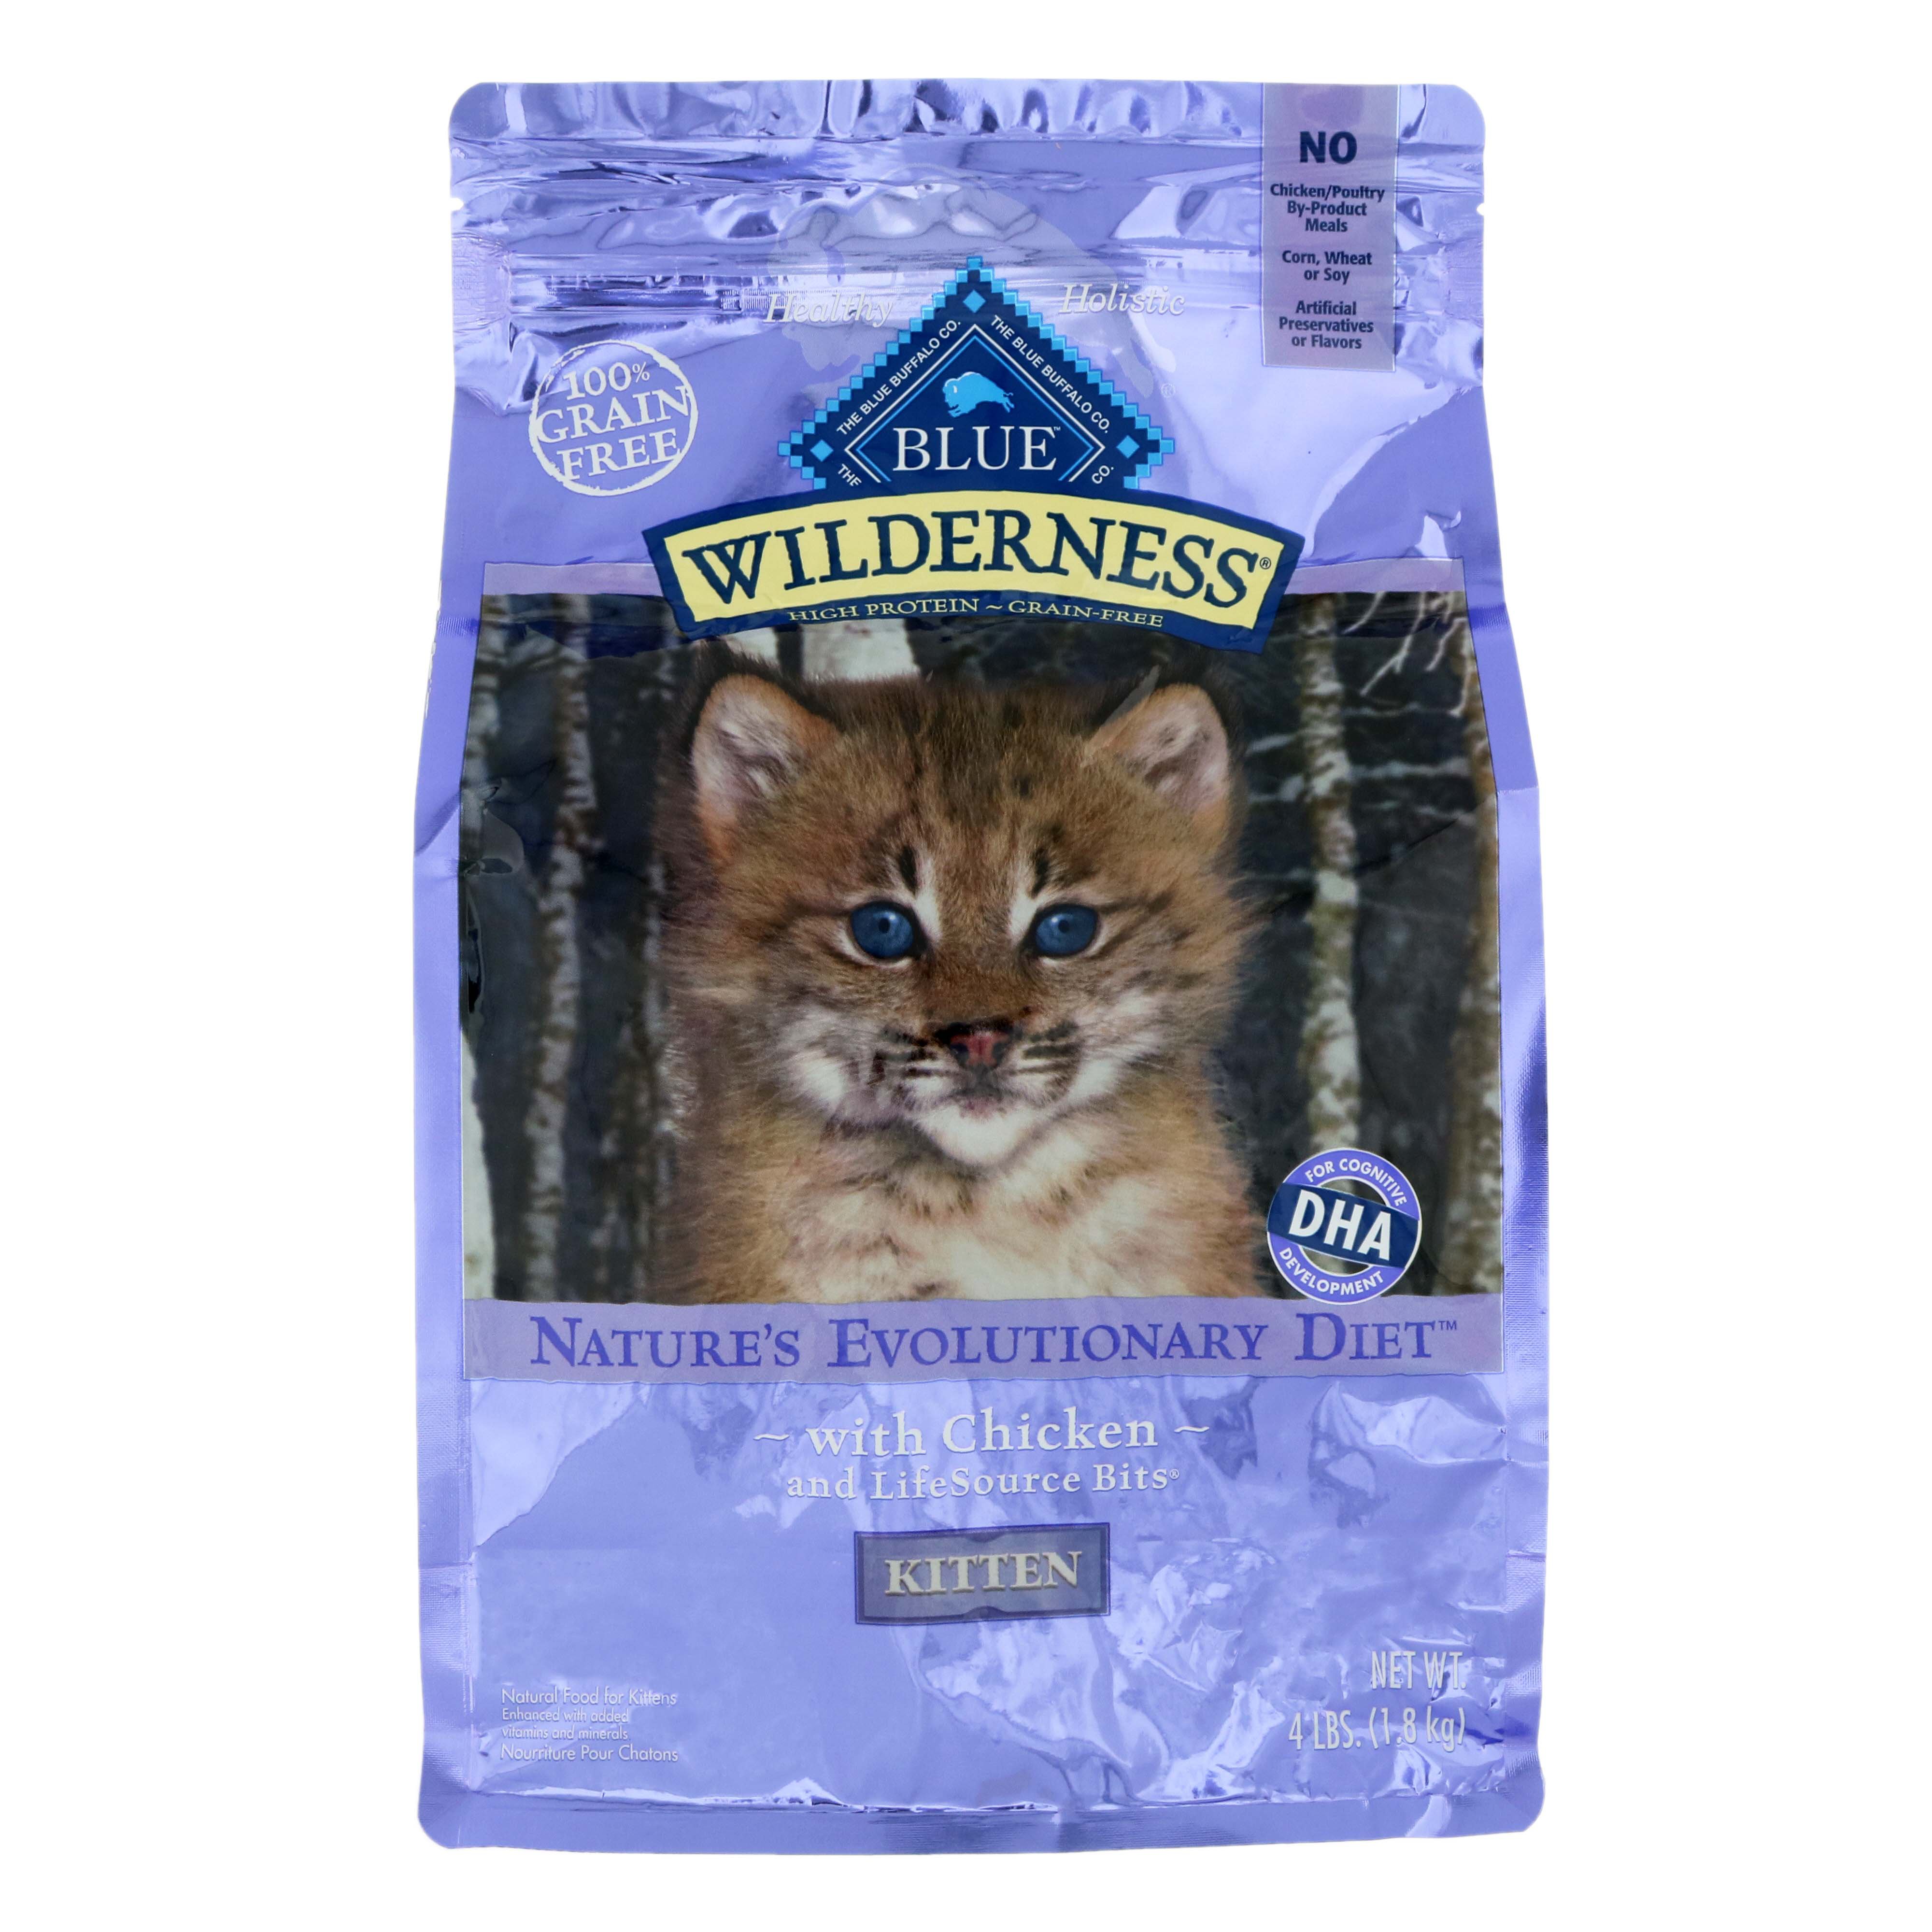 Nutrisource Cat Food Recall WOrld Of Cats